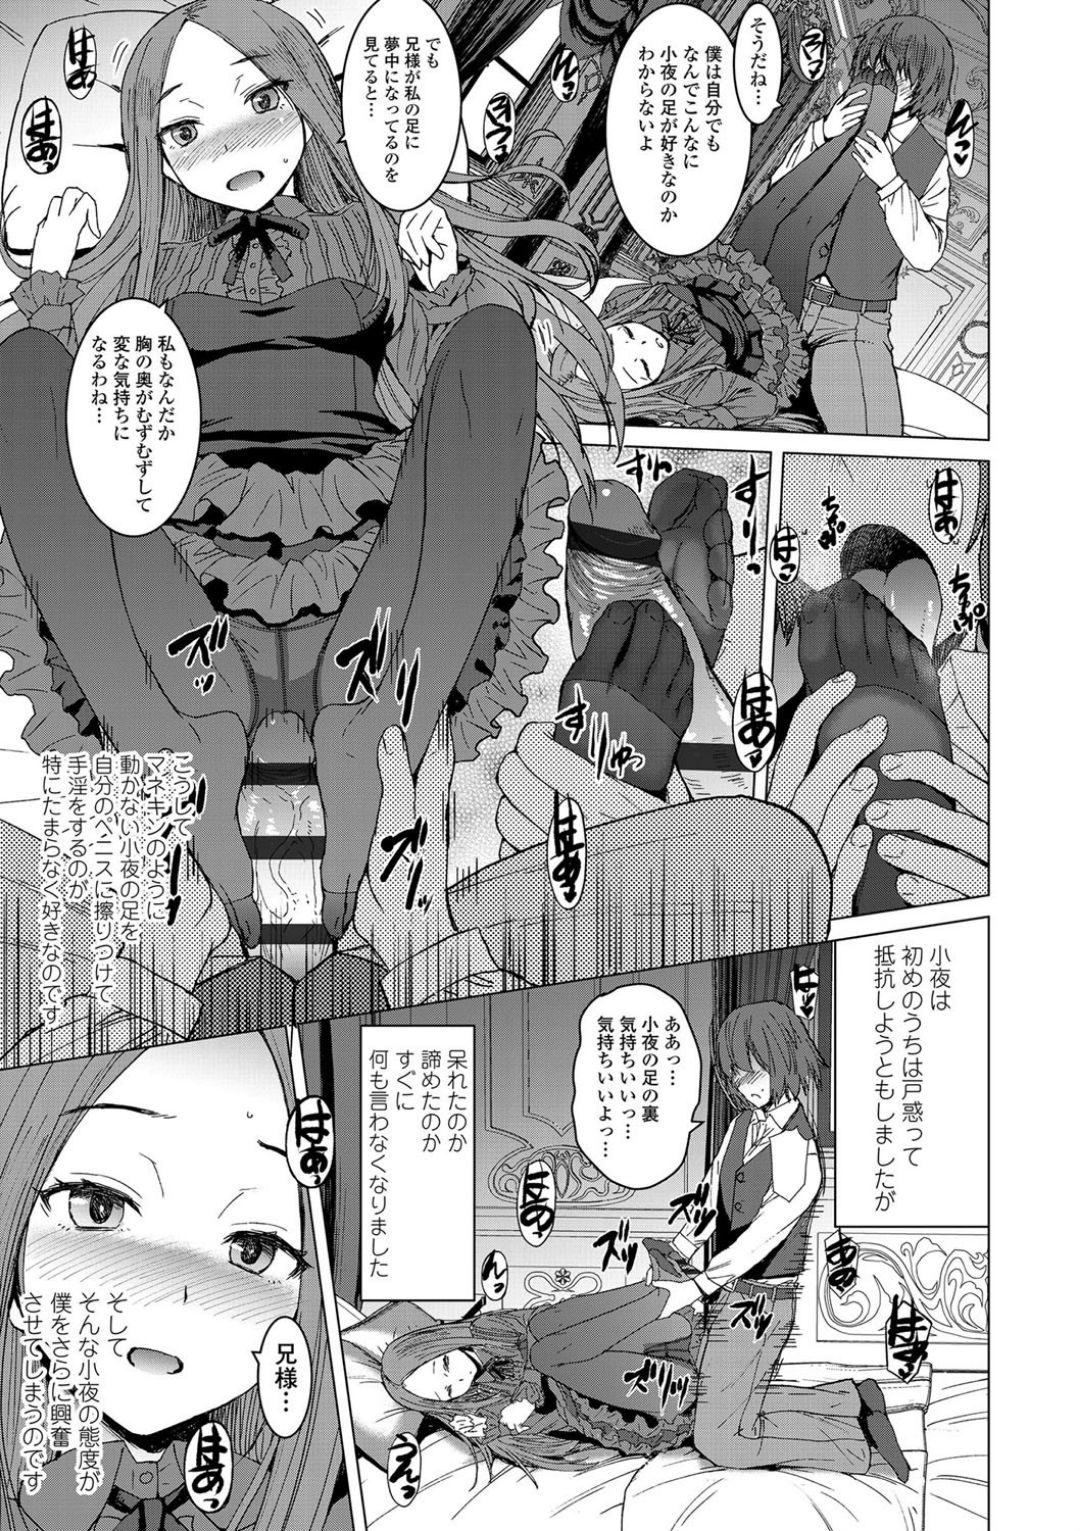 Softcore Aisarete Miru? - Do you want to be dominated? Anime - Page 7